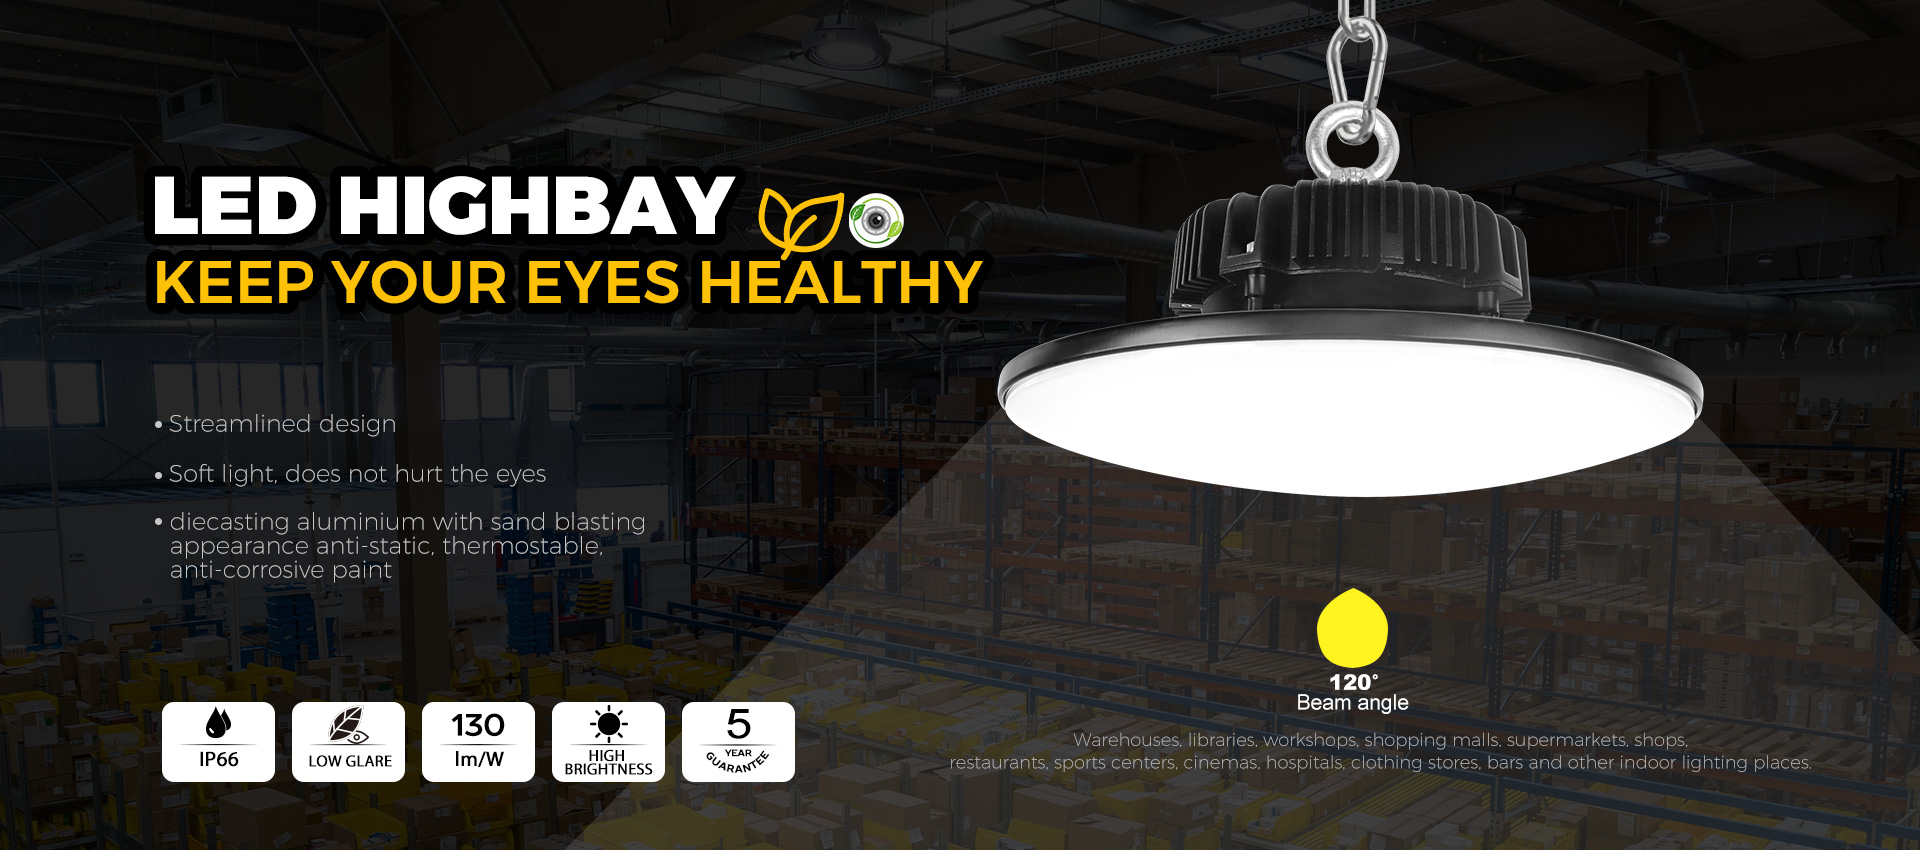 What Are The Best High Bay Led Lights?